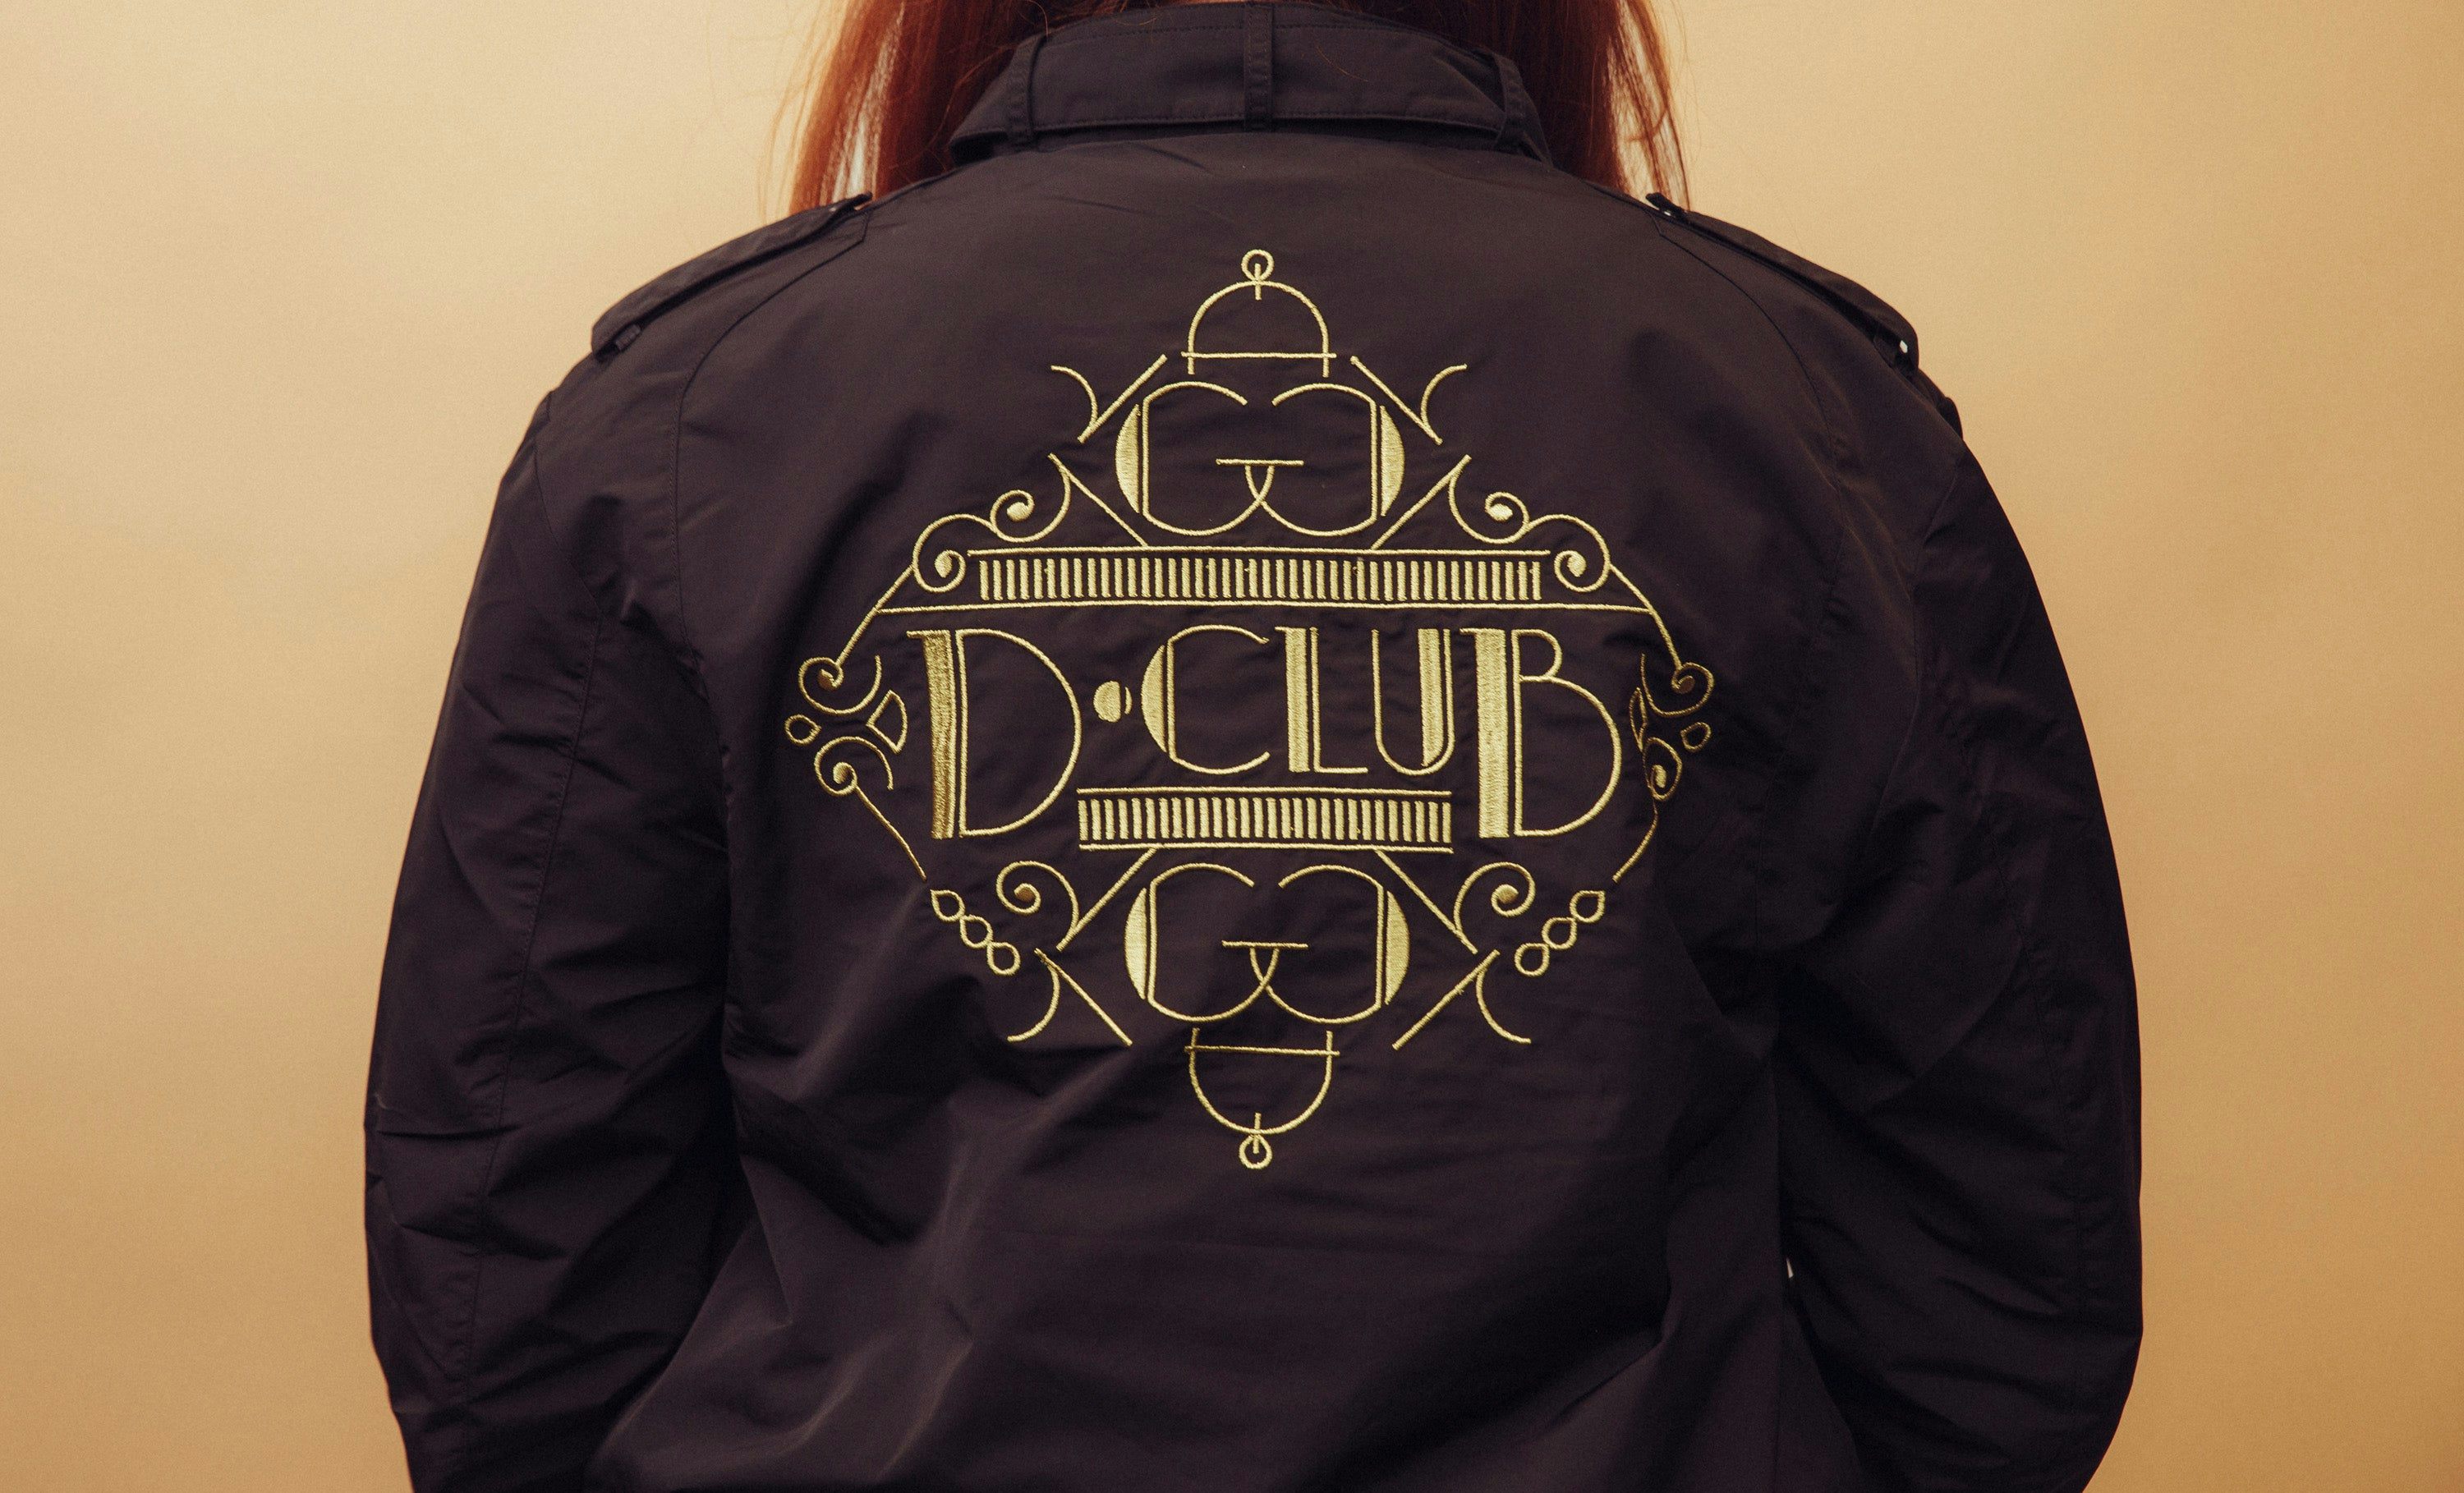 Game Grumps - "D Club" Members Only Jacket